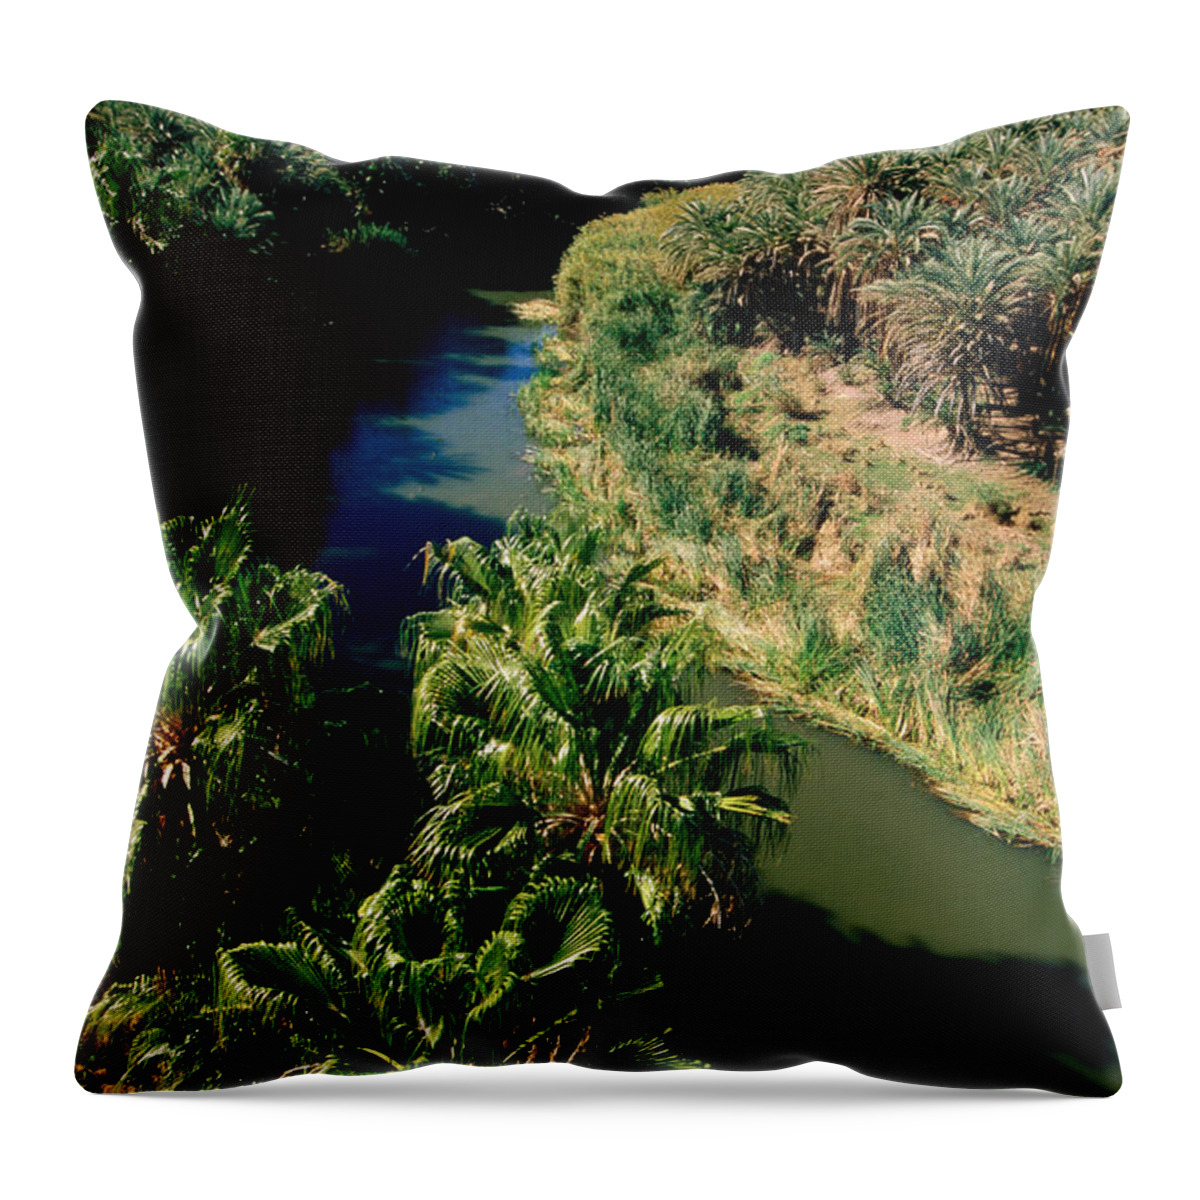 Shadow Throw Pillow featuring the photograph Rio Mulege And Palm Grove From by John Elk